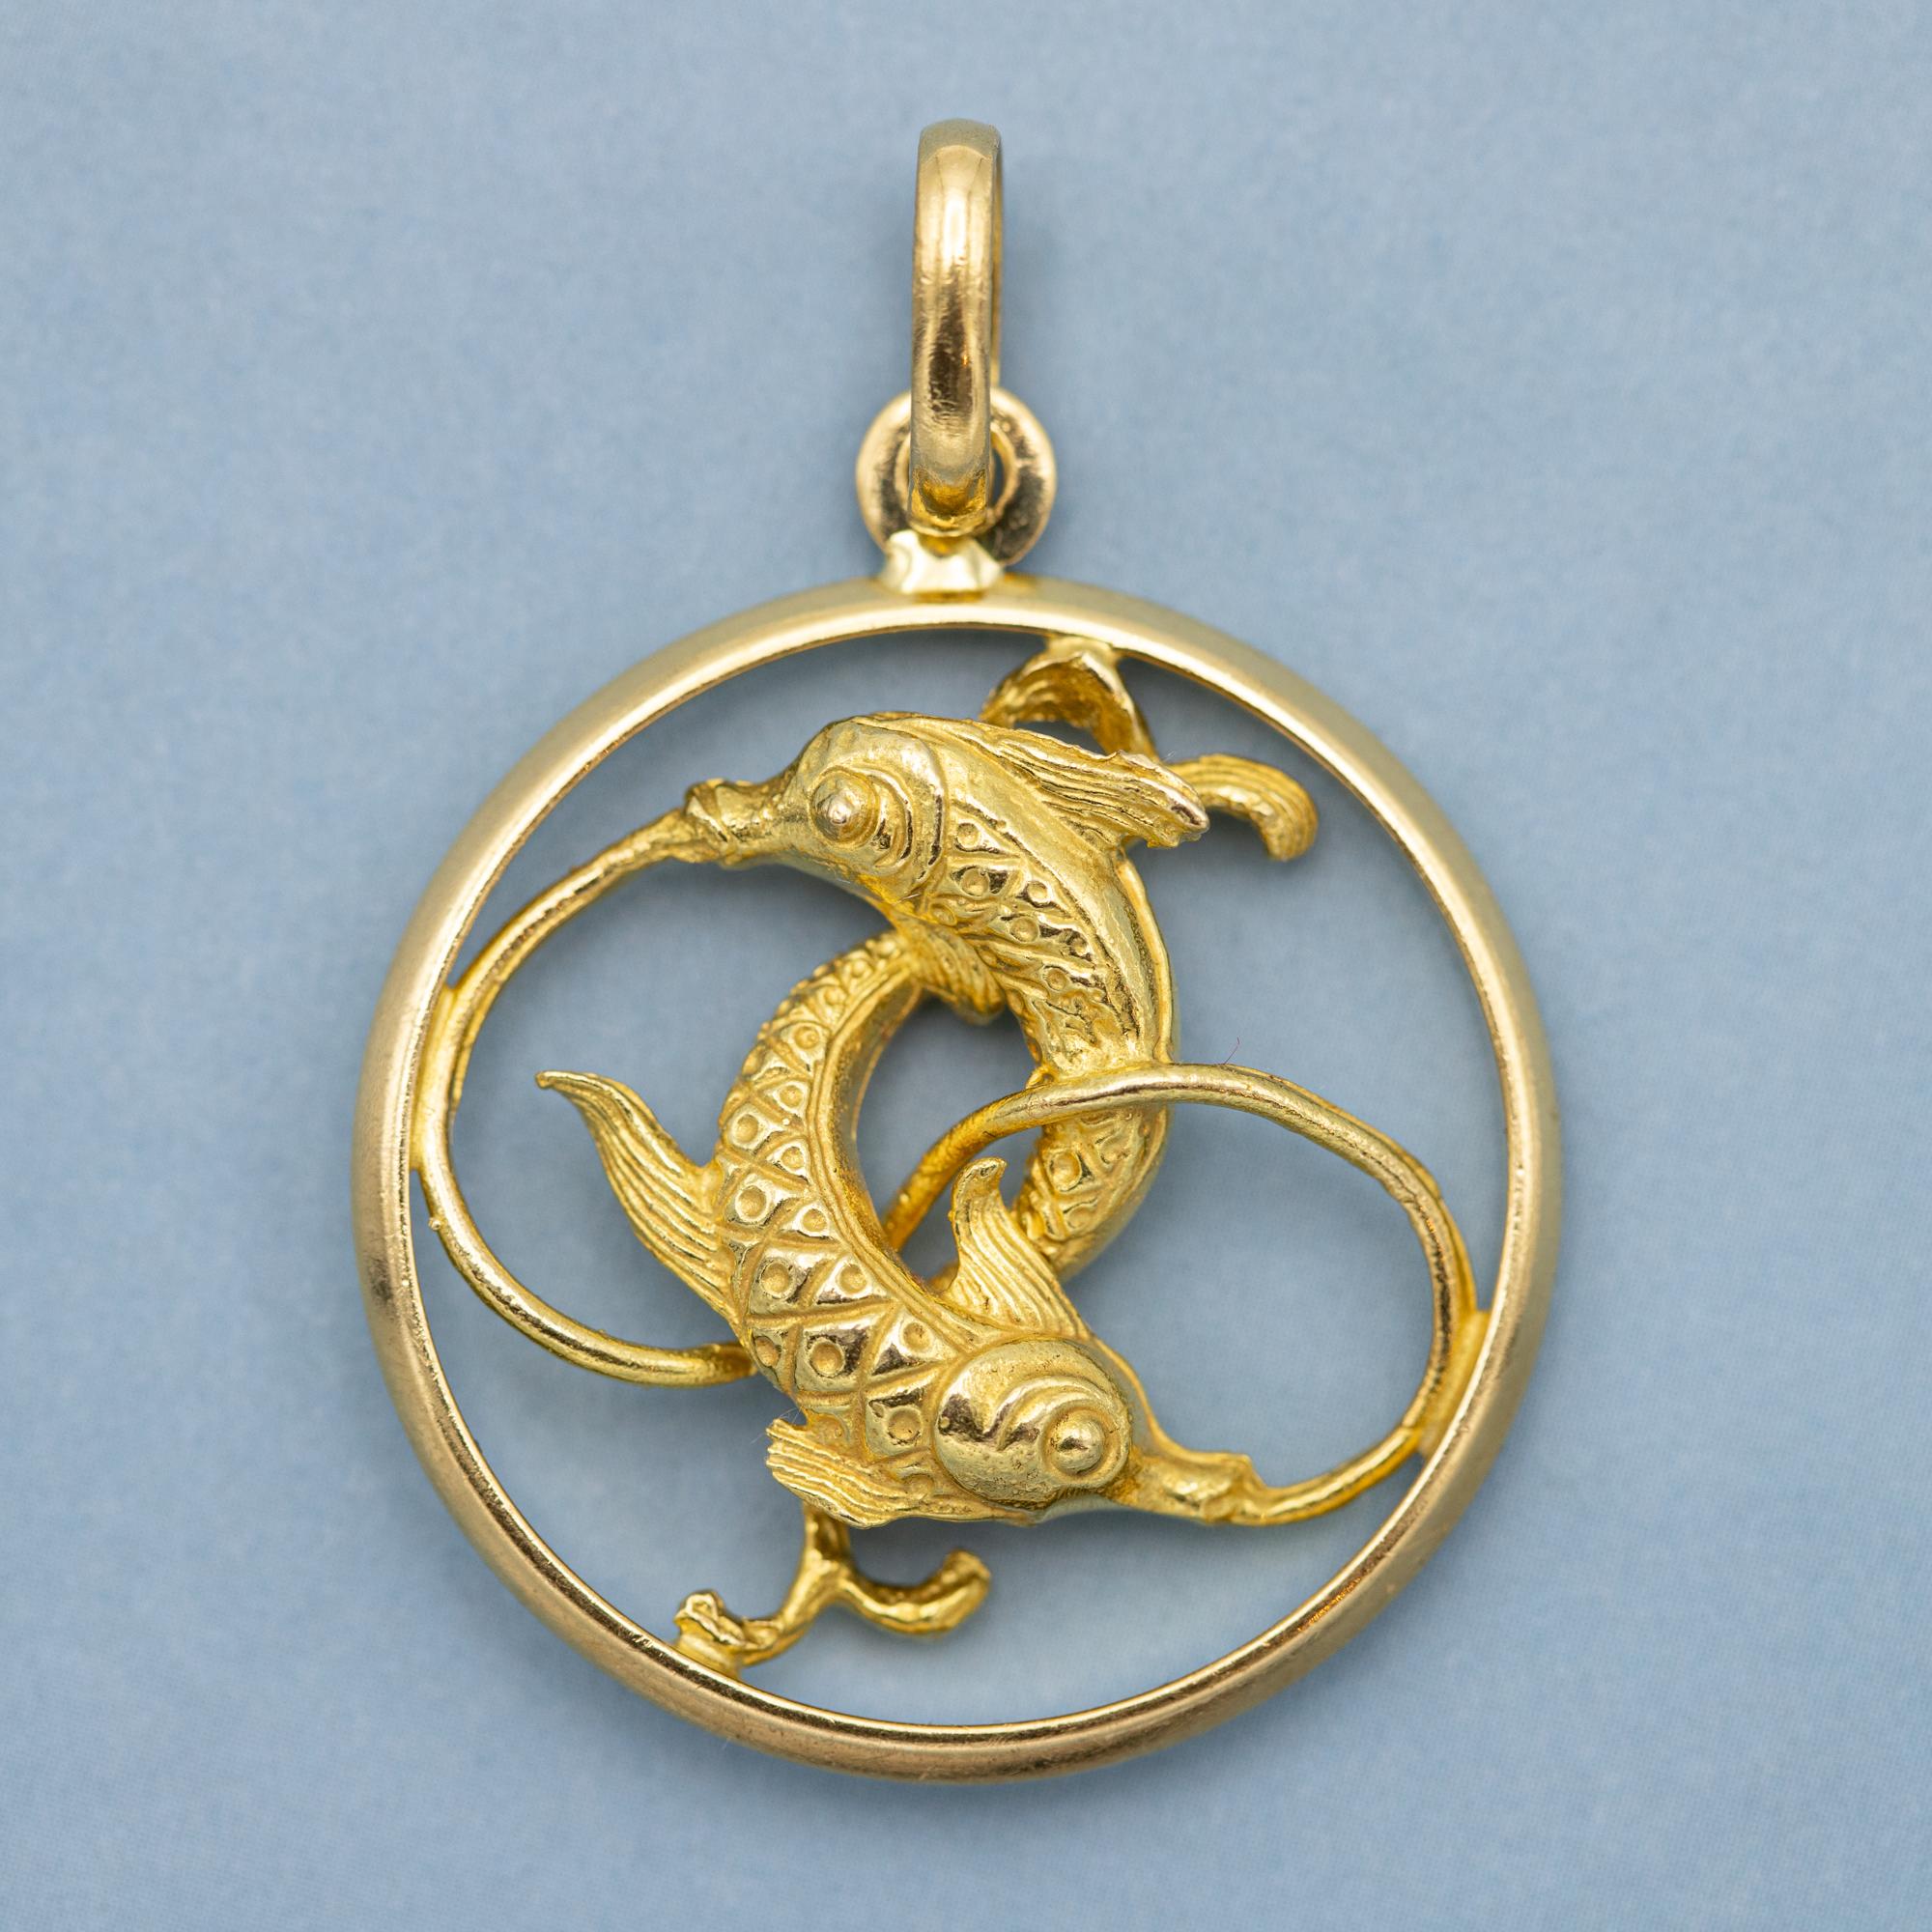 XL Large 18k zodiac charm pendant - Pisces medallion - solid yellow gold For Sale 2